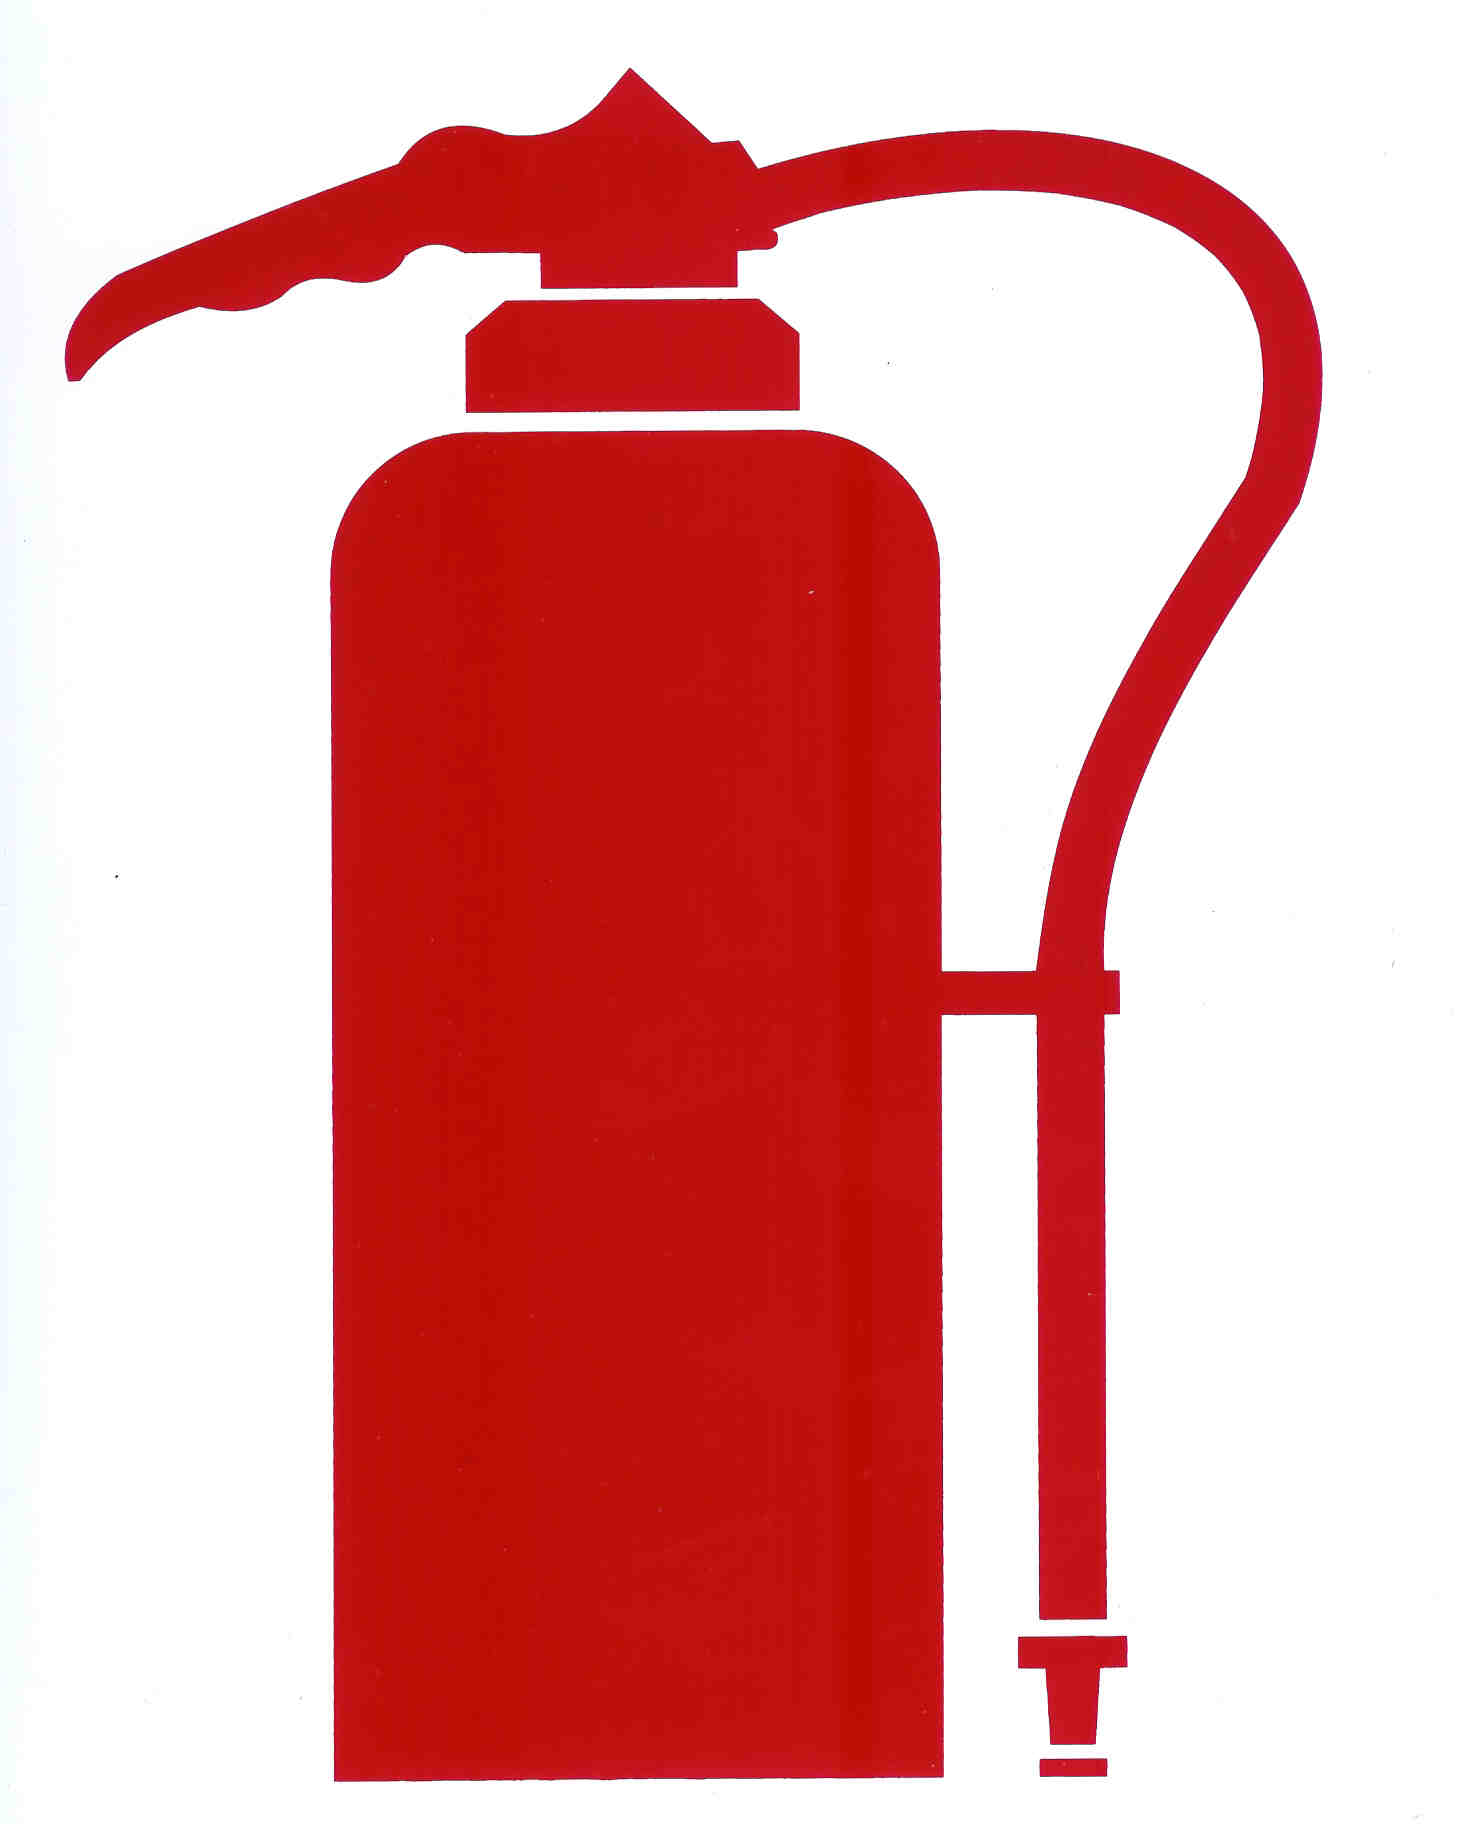 Free fire extinguisher images clipart